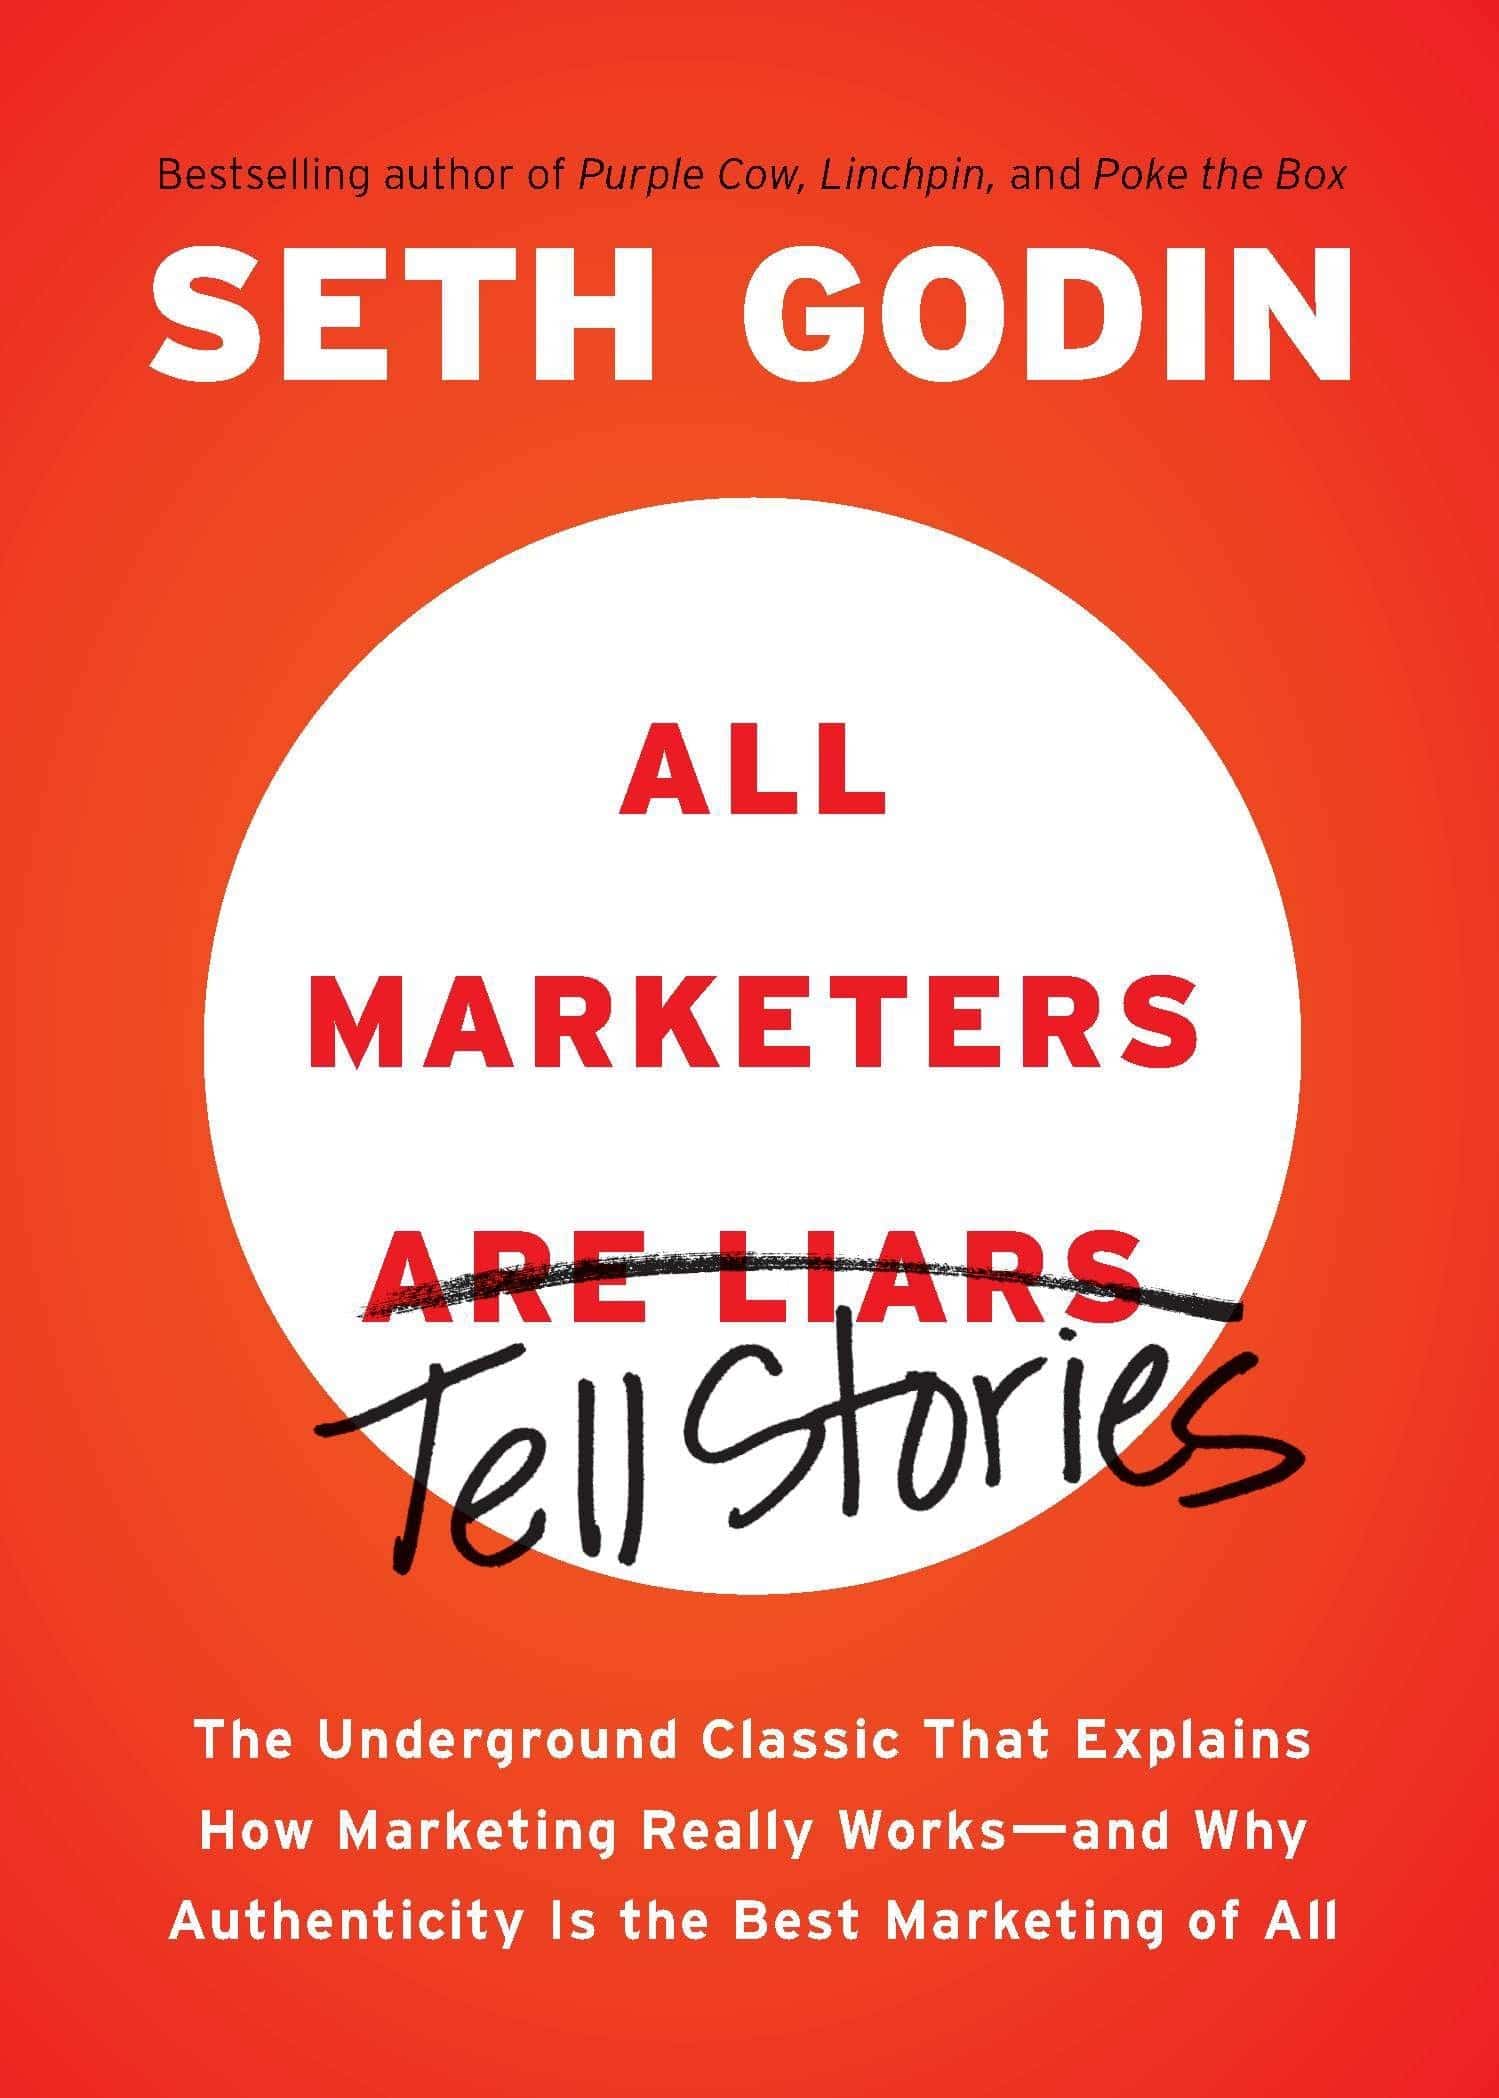 All Marketers Tell Stories